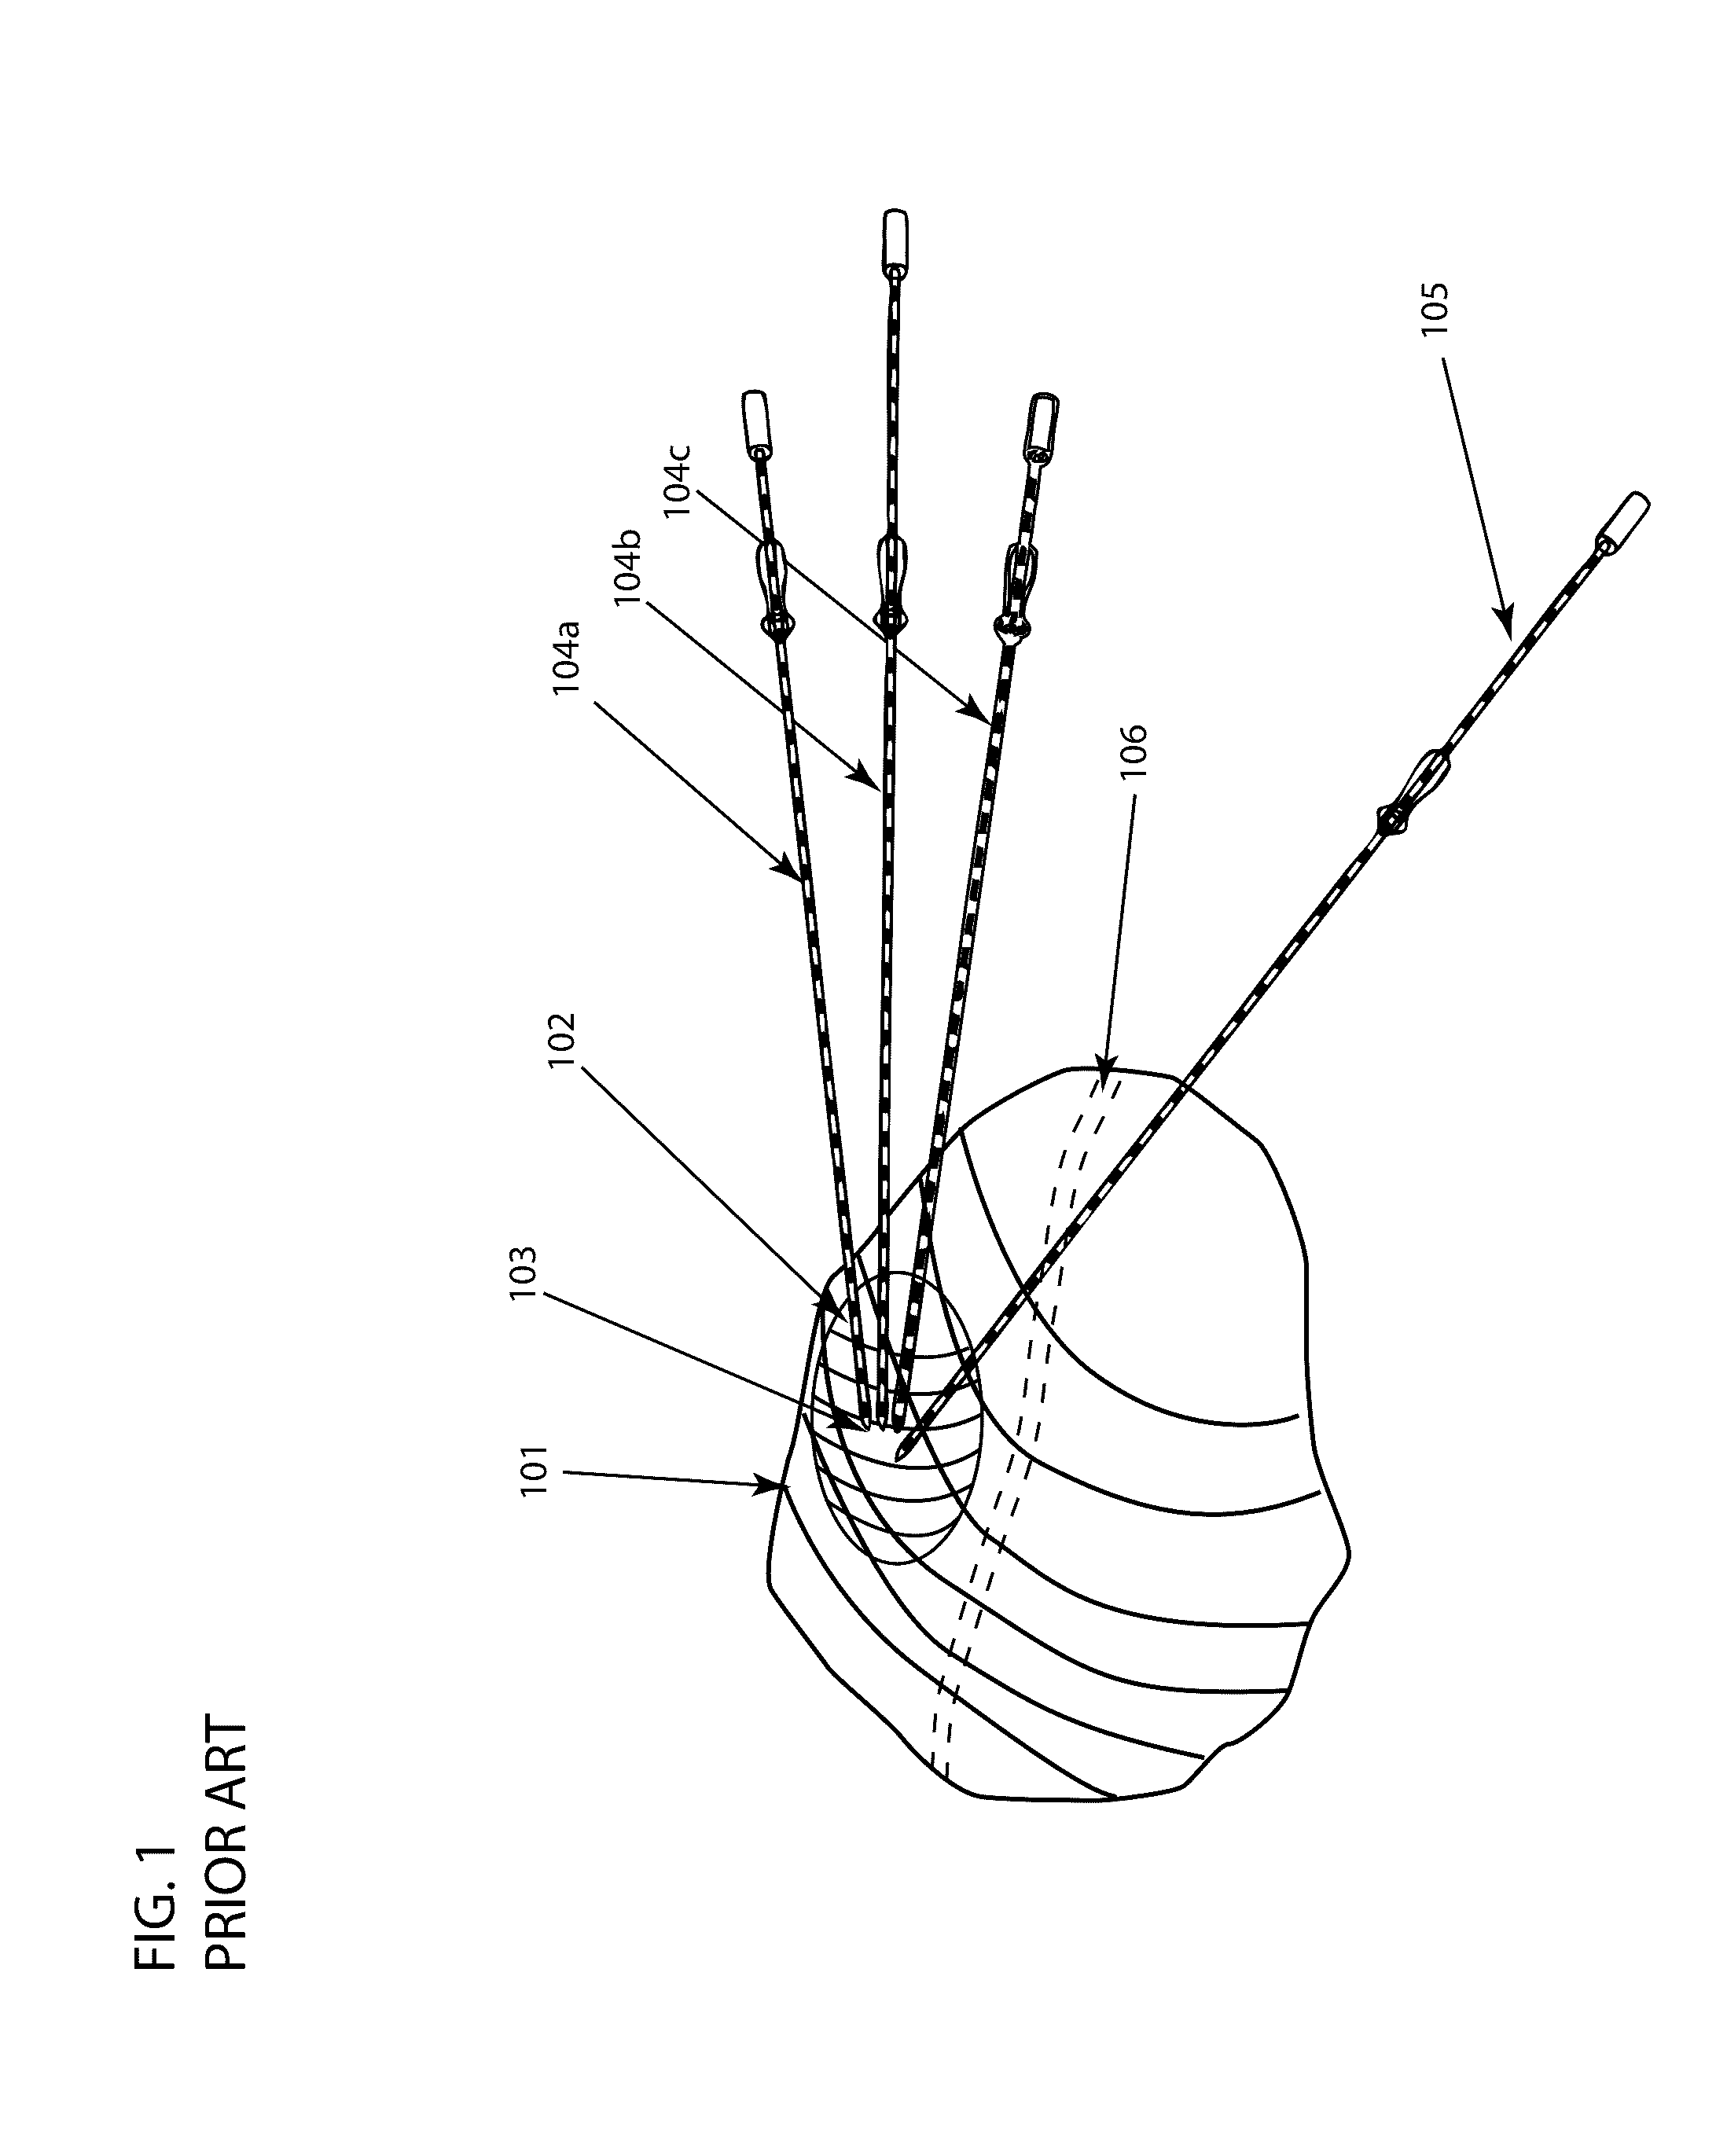 Systems, methods, and devices for assisting or performing guided interventional procedures using custom templates